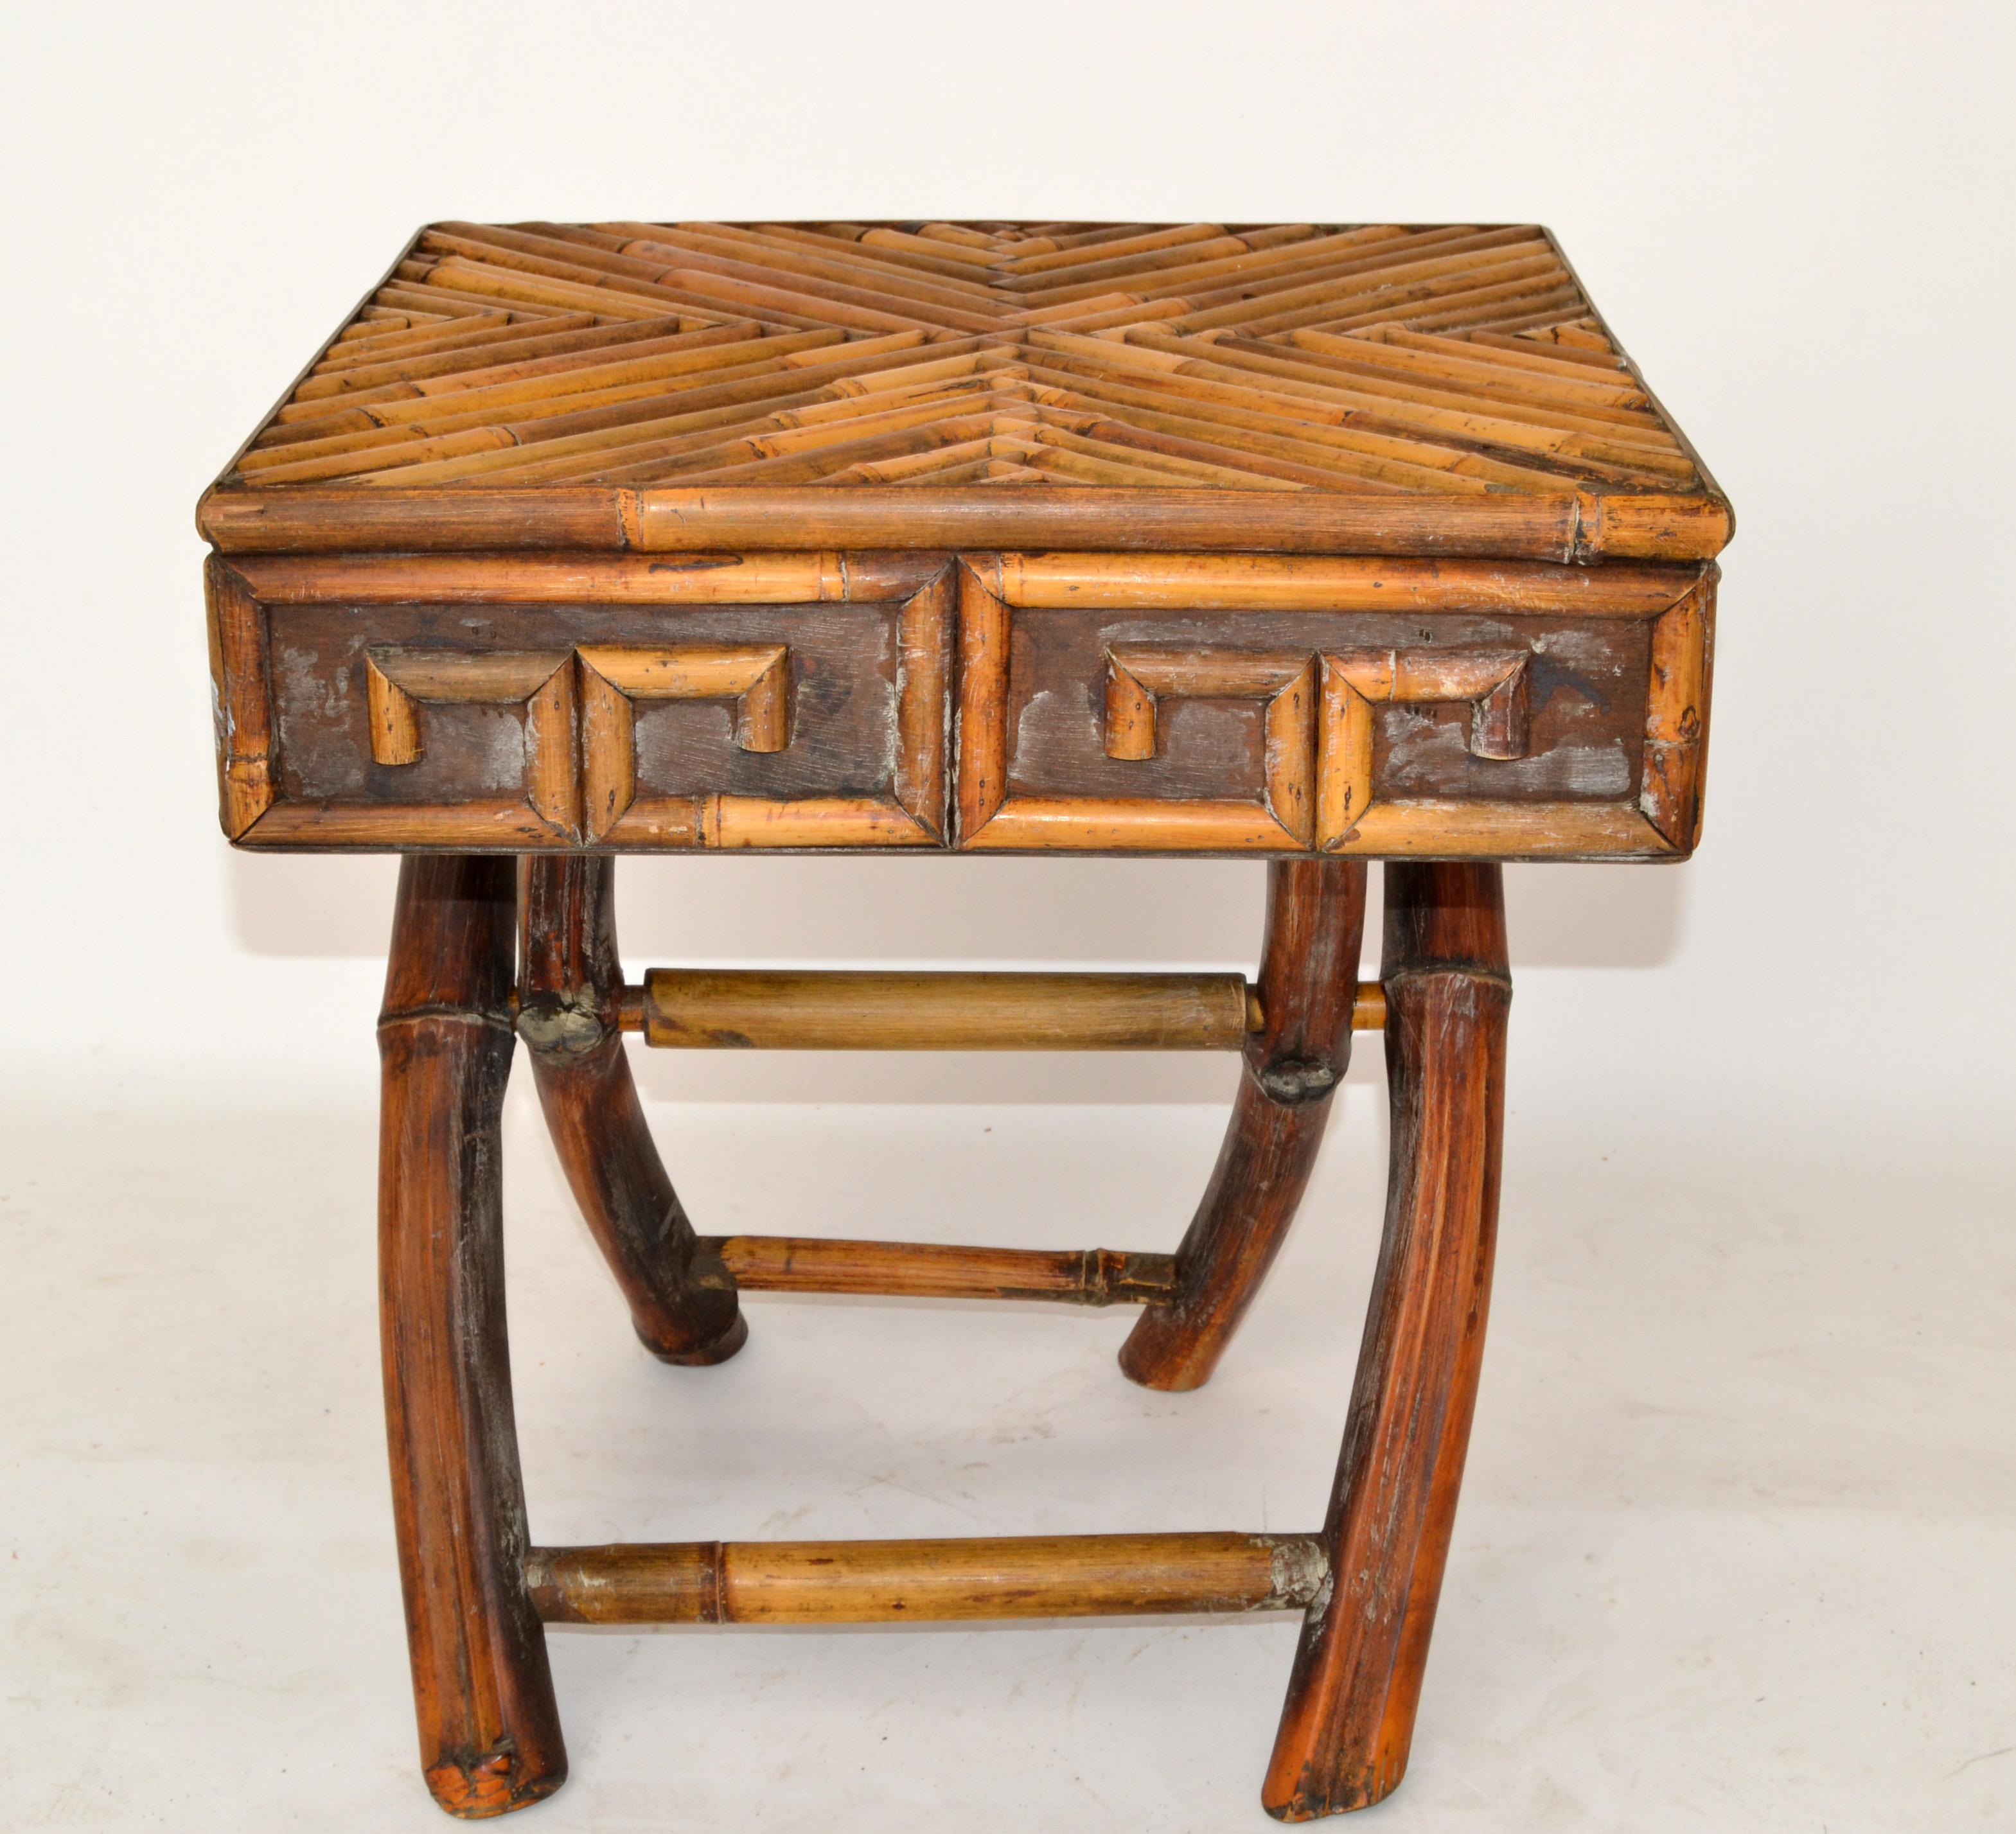 1 Bohemian Greek Key Pattern Handcrafted Bamboo & Cane Folding Side Drink Table In Good Condition For Sale In Miami, FL